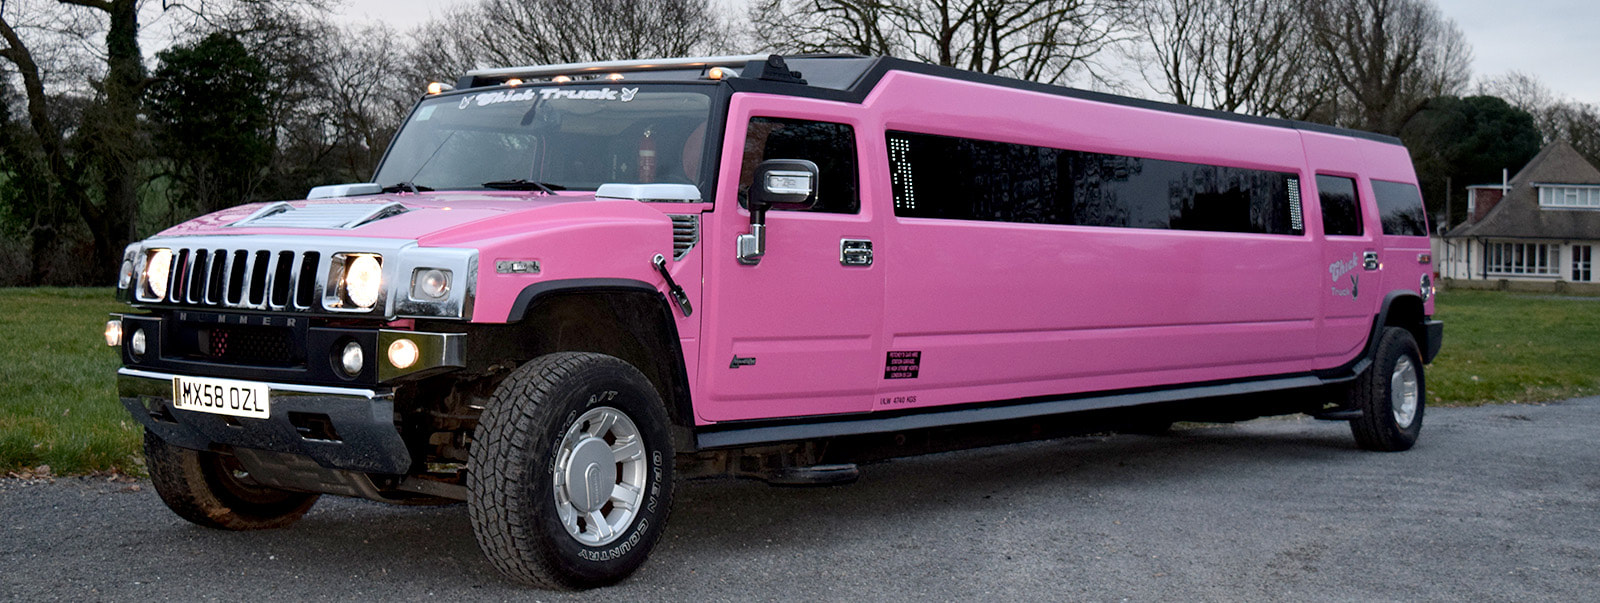 Pink Hummer Limo Hire Sale